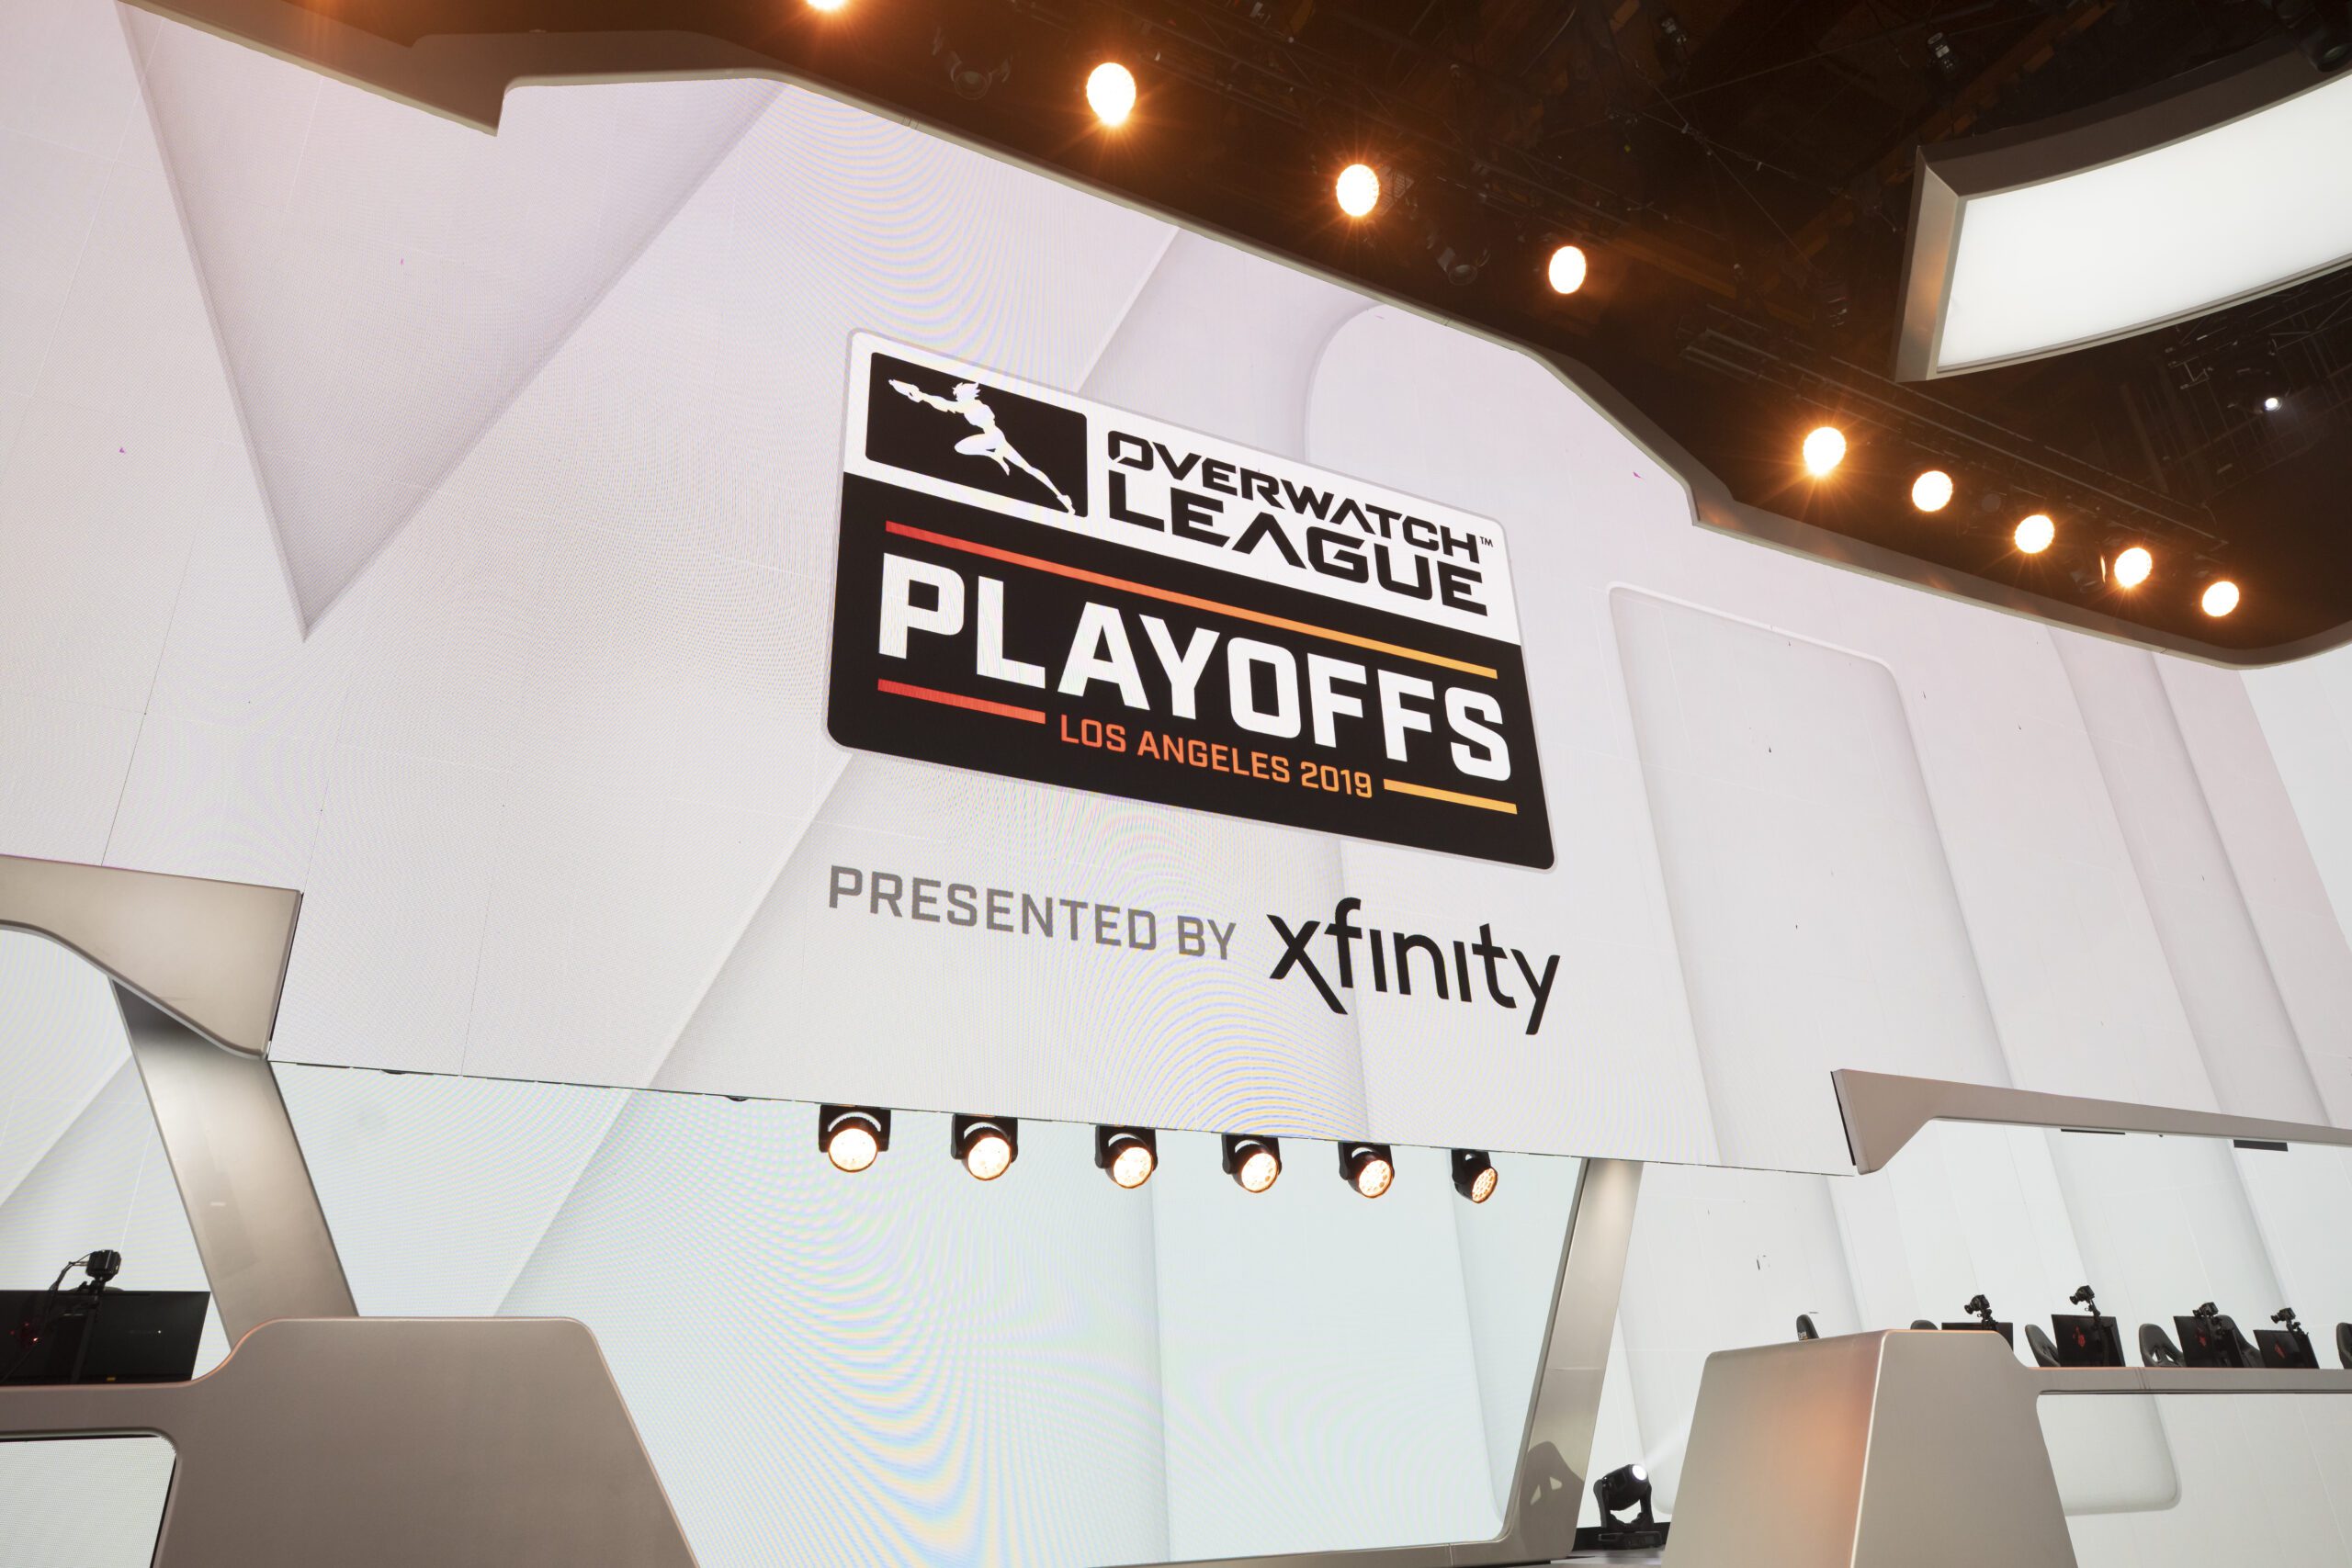 The Overwatch League playoffs kick off today, the last event before players test Overwatch 2